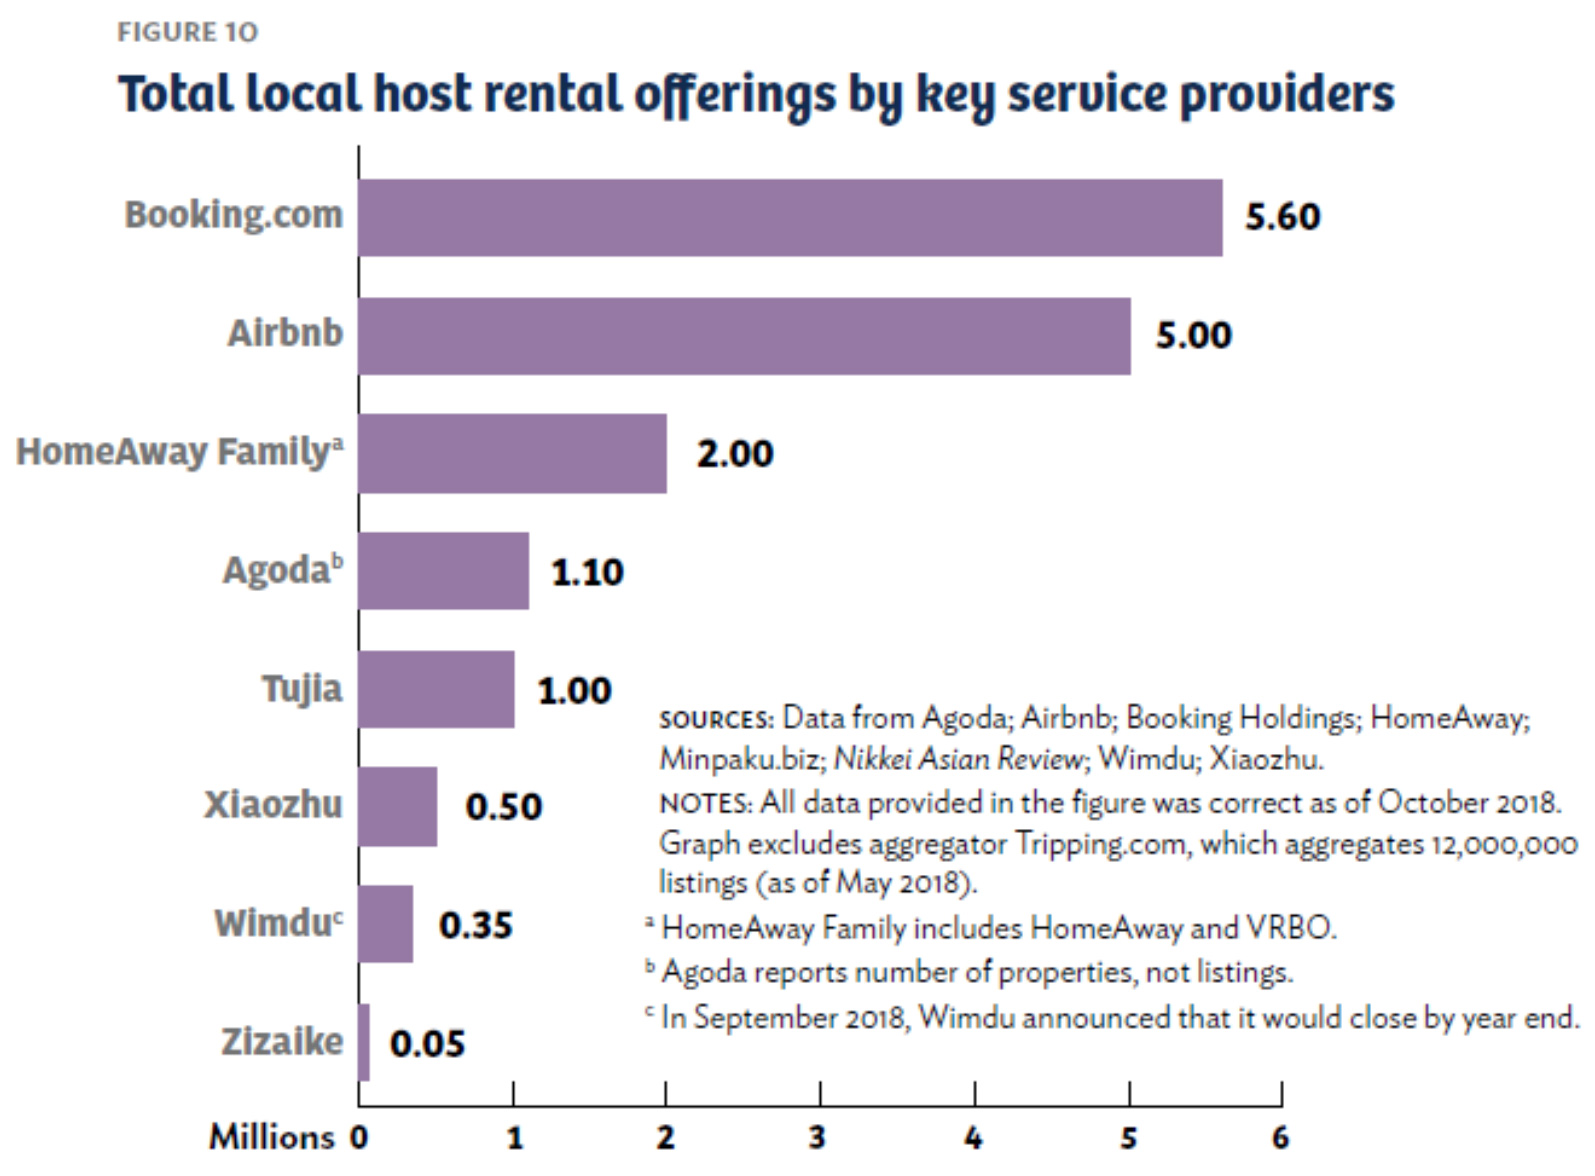 Total local host rental offerings by key service providers